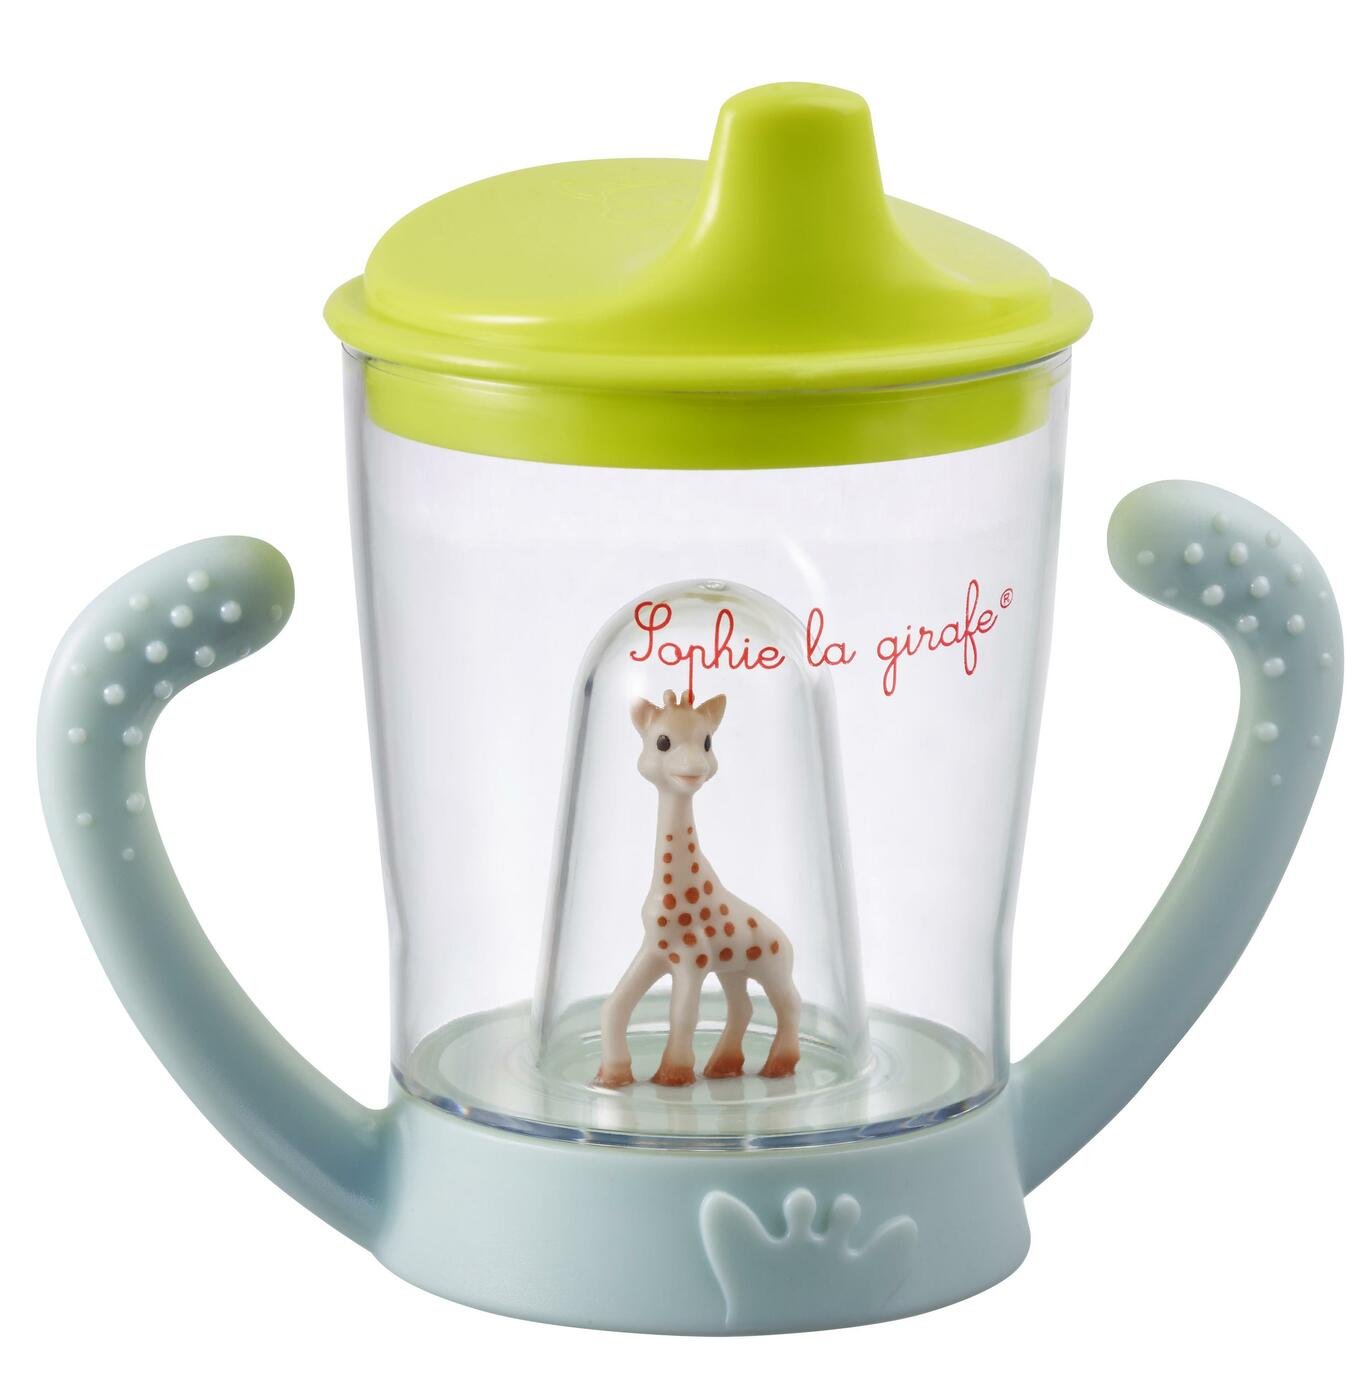 Vulli Sophie la girafe Non Spill Cup Review